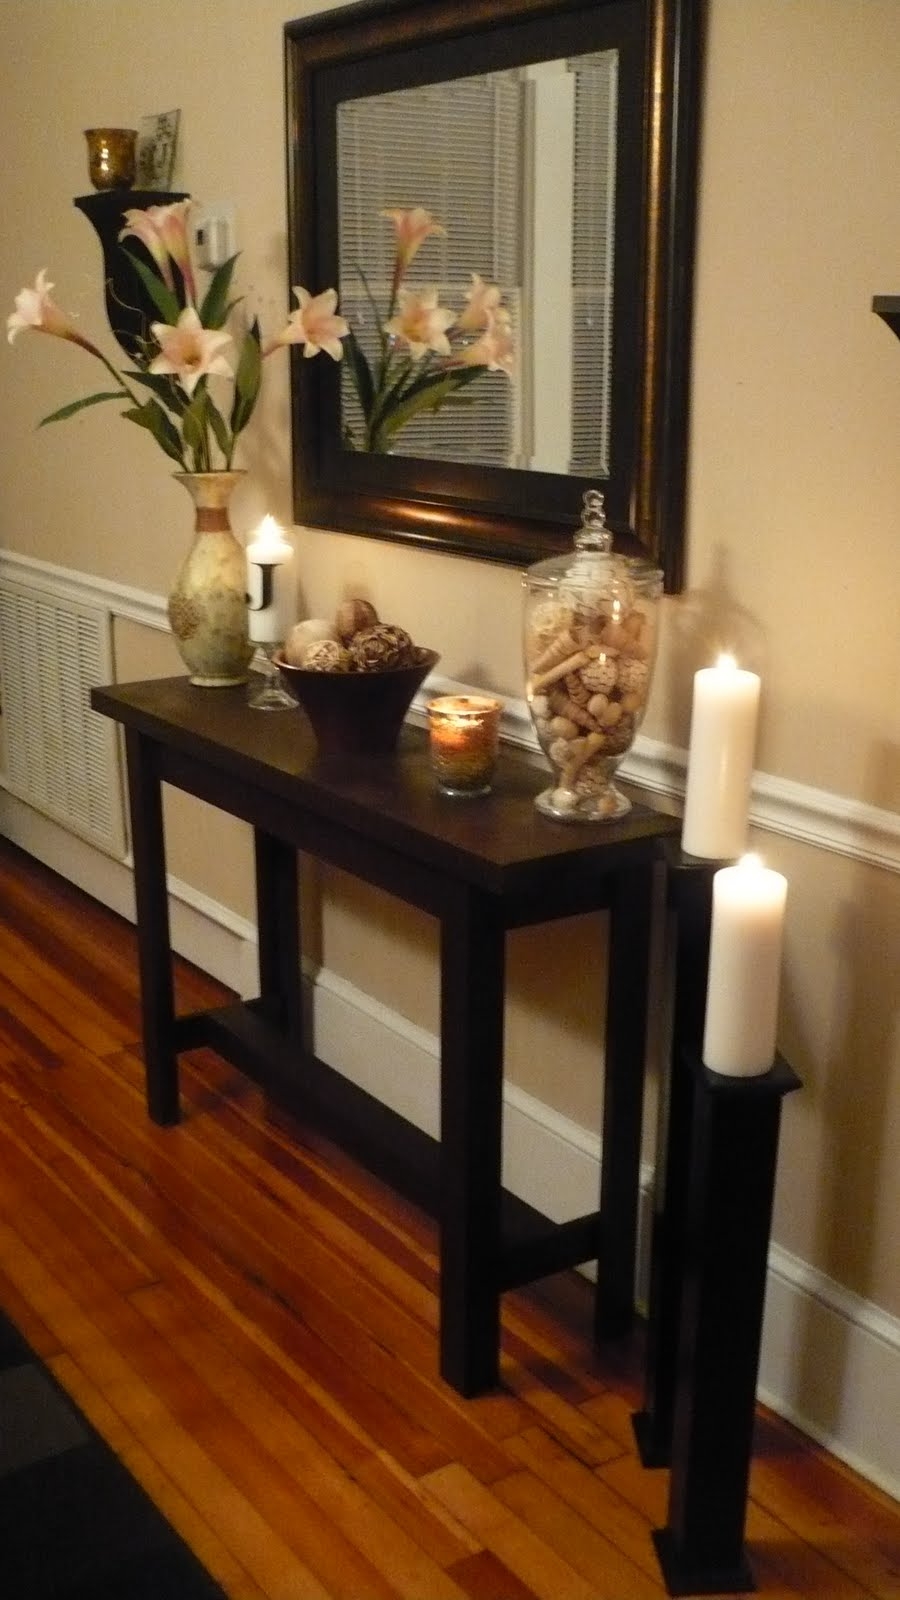 Very console table